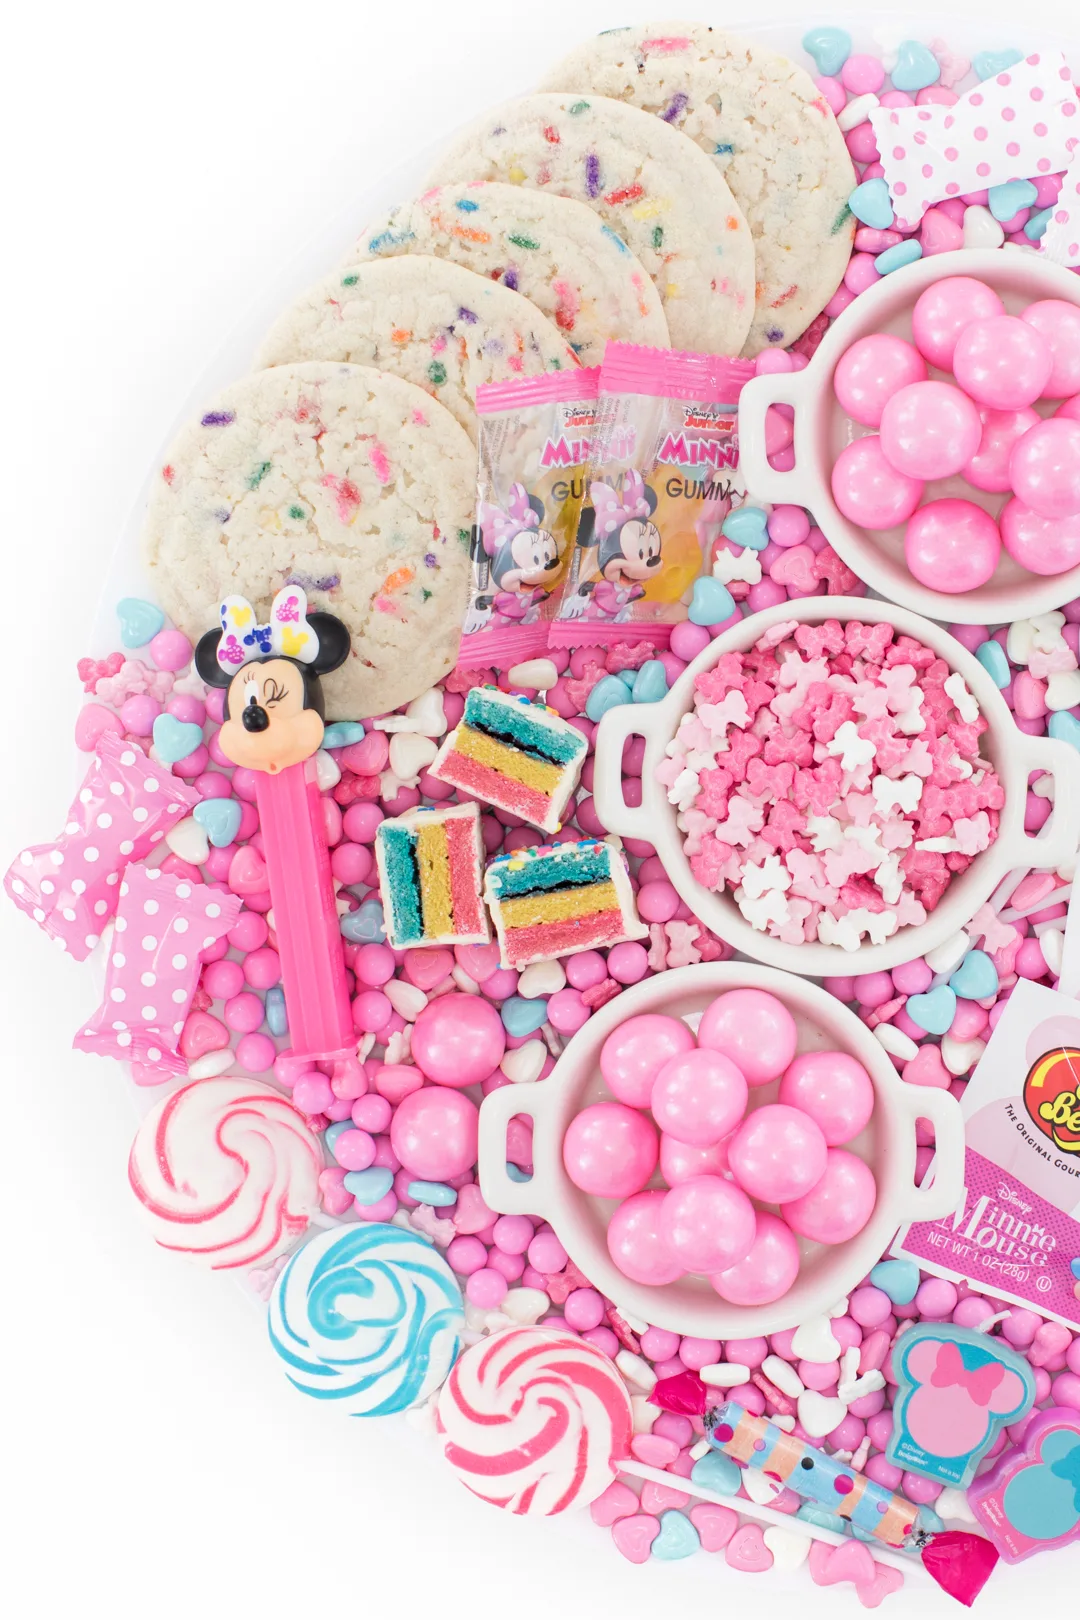 pretty pink display of candies for minnie mouse parties